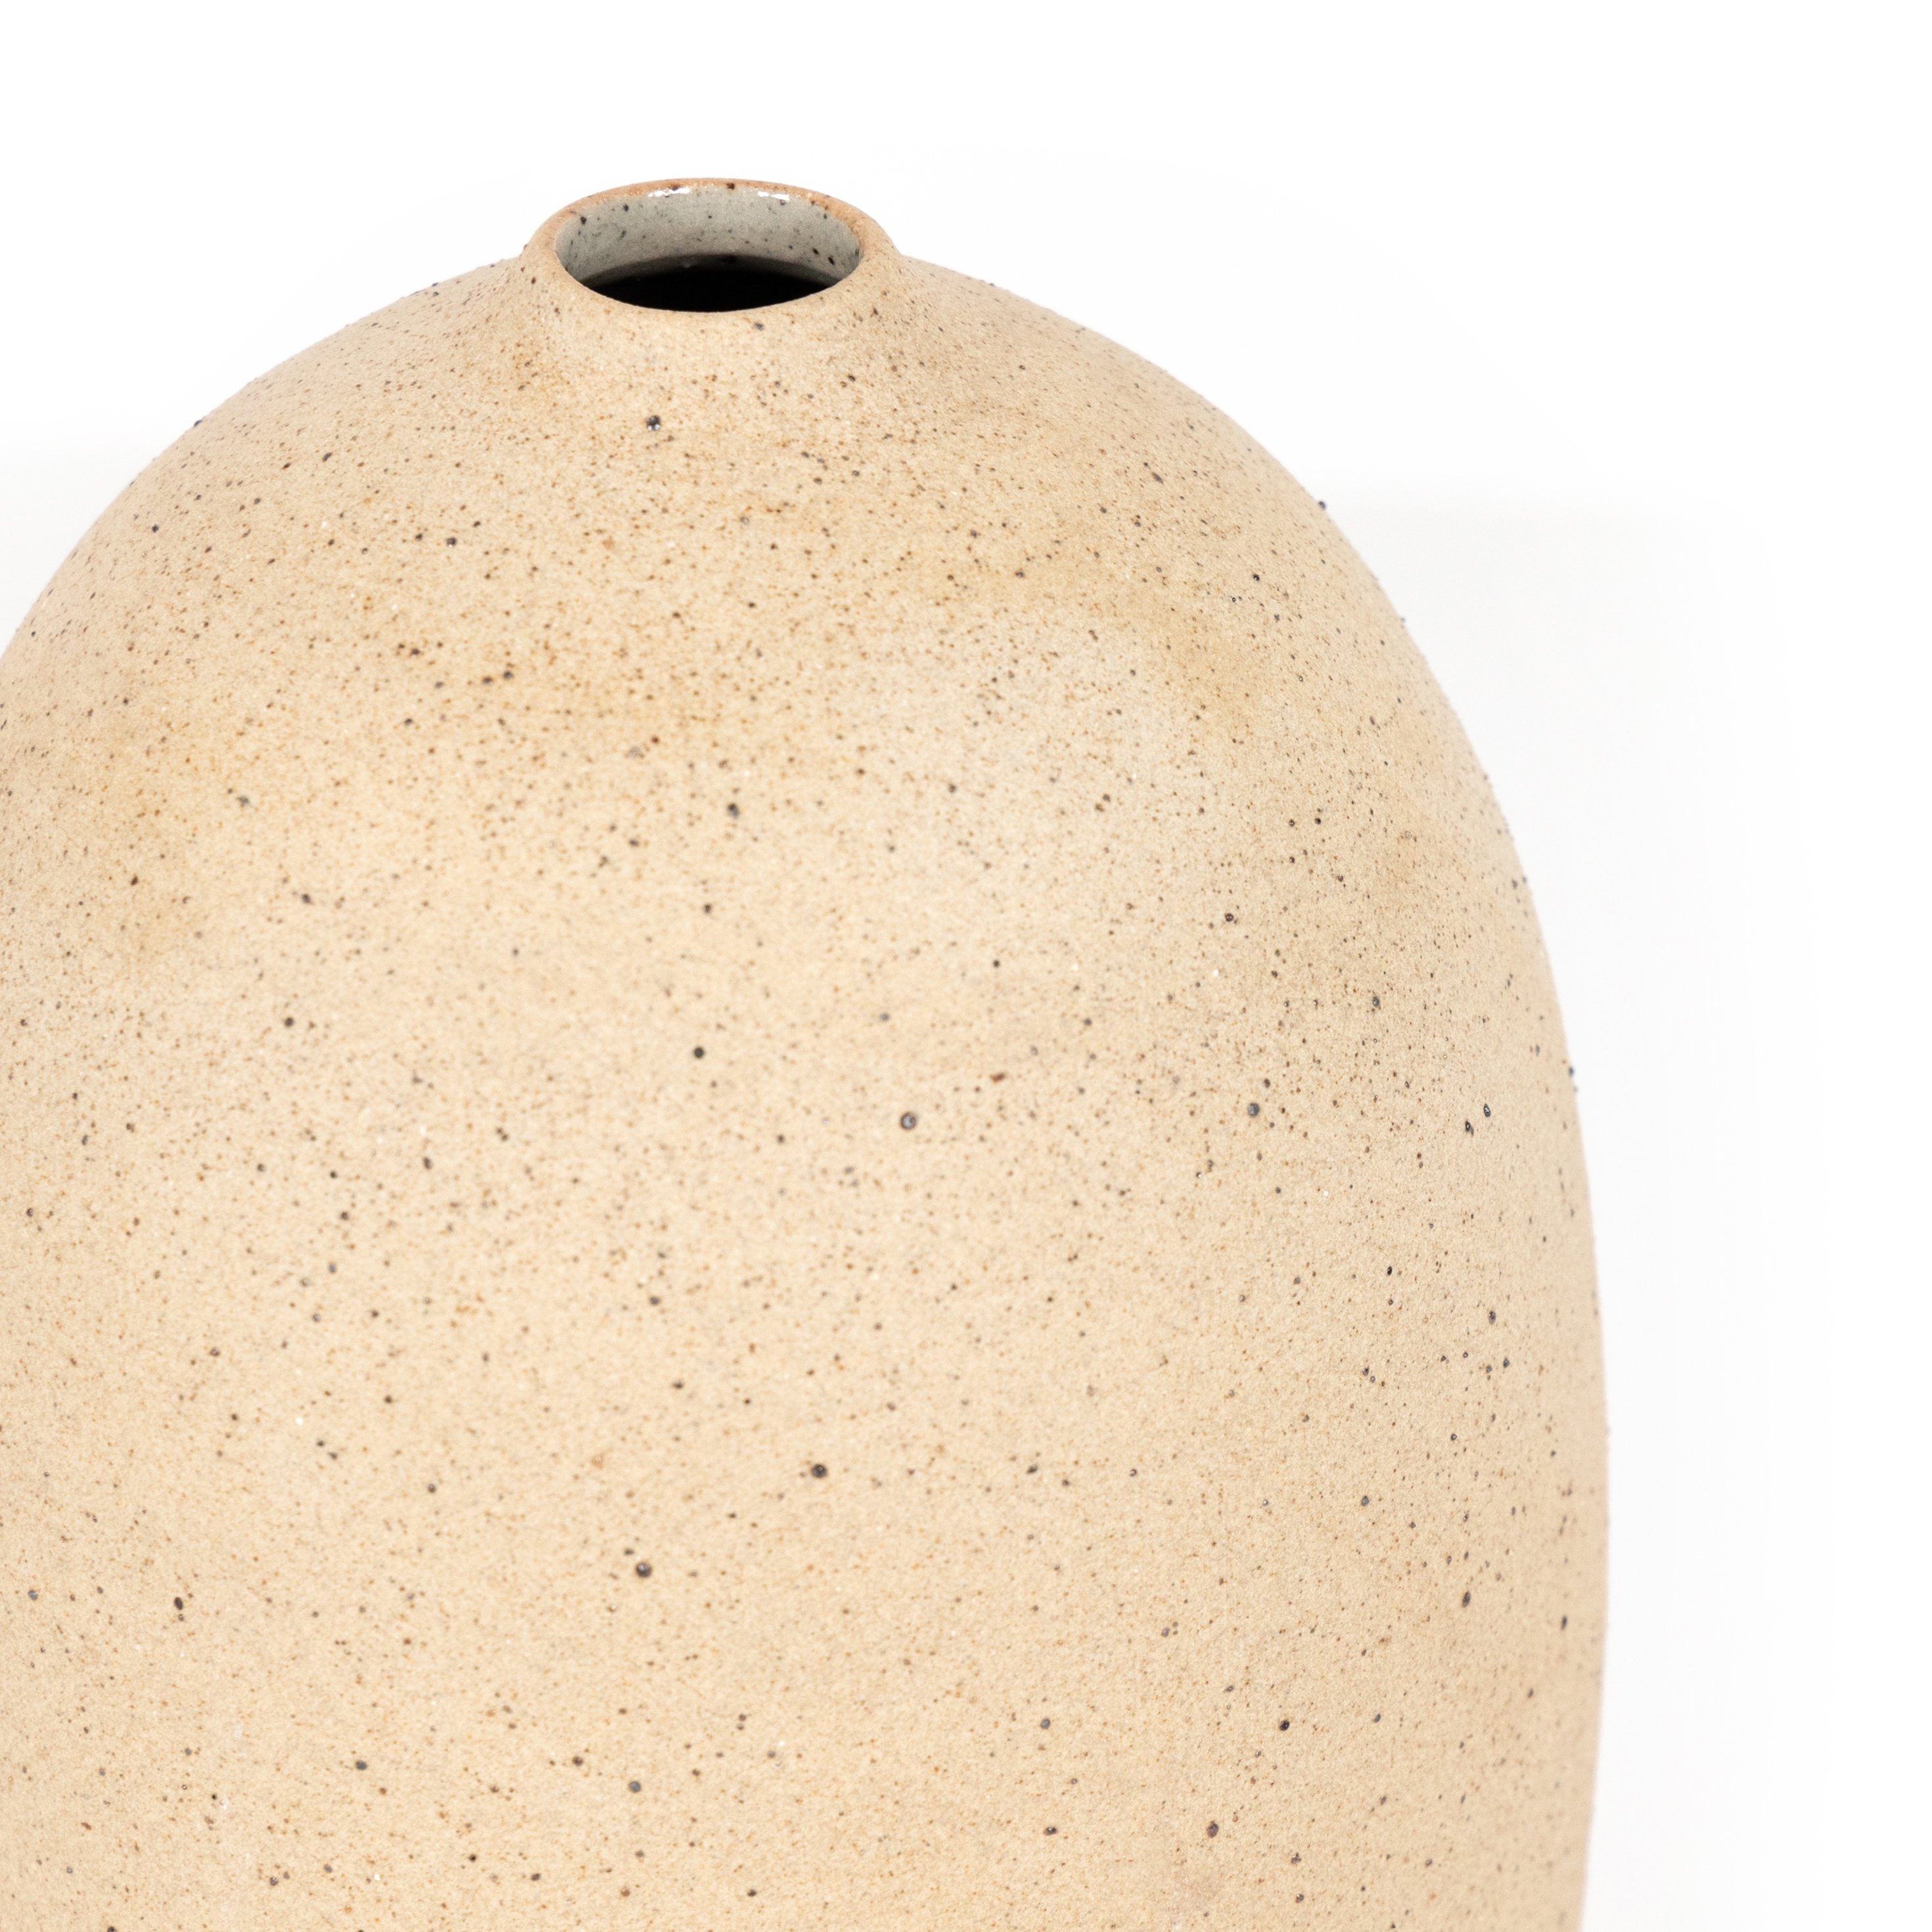 Izan Tall Vase-Natural Speckled Clay - Image 2